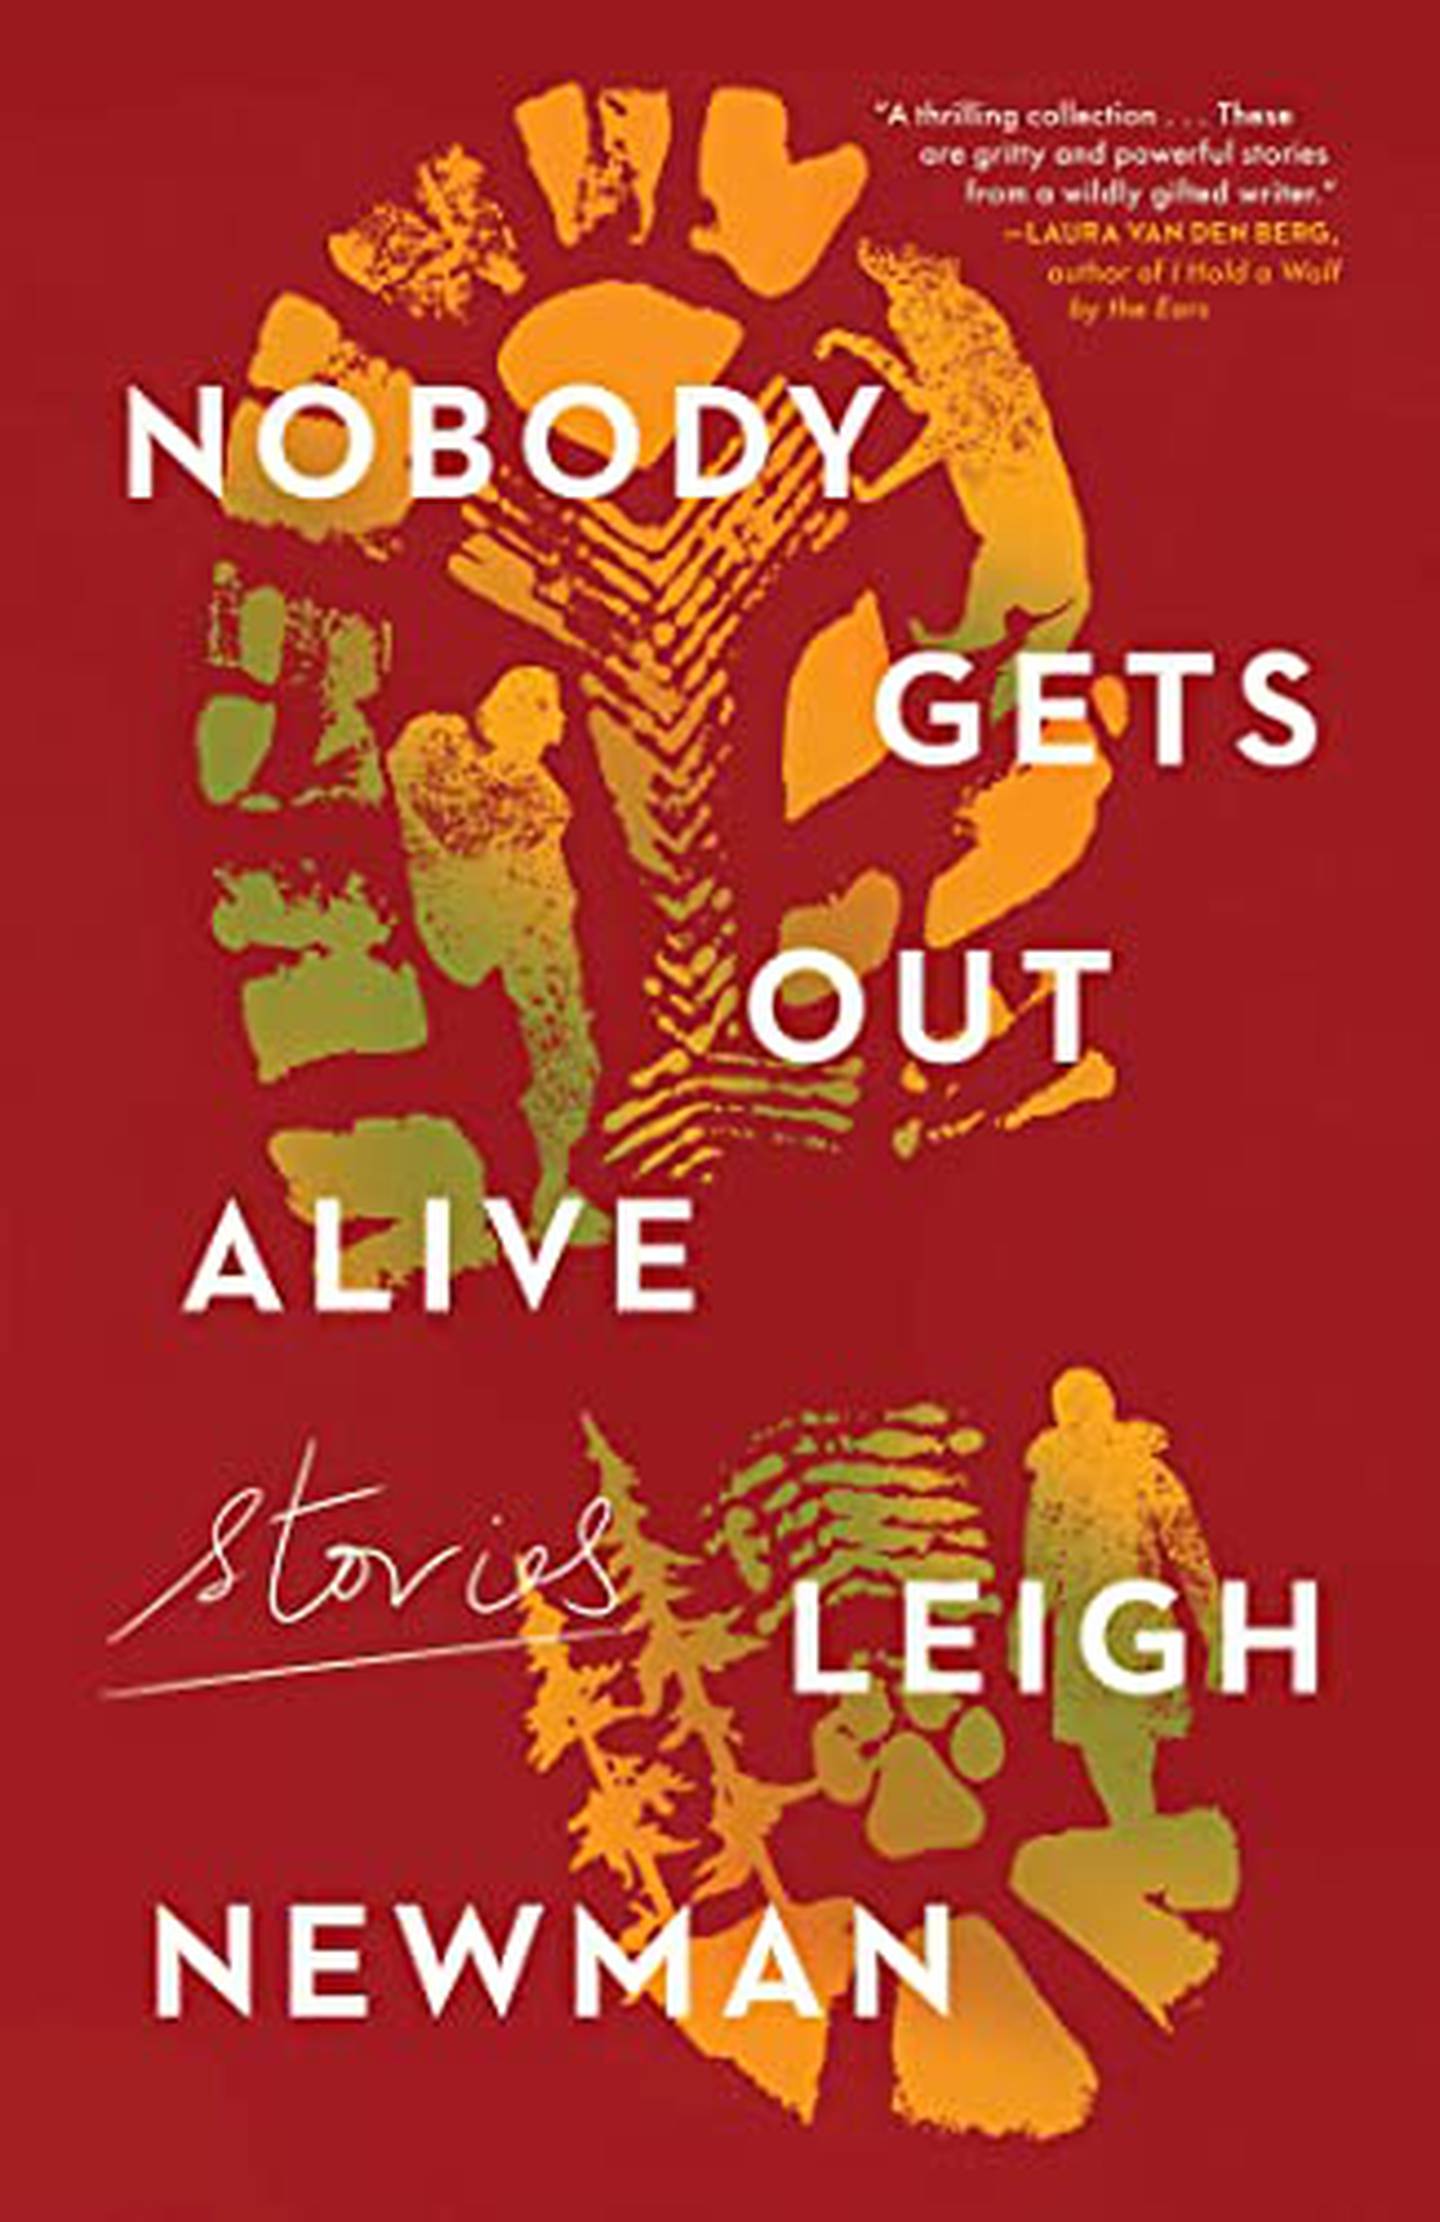 “Nobody Gets Out Alive: Stories”